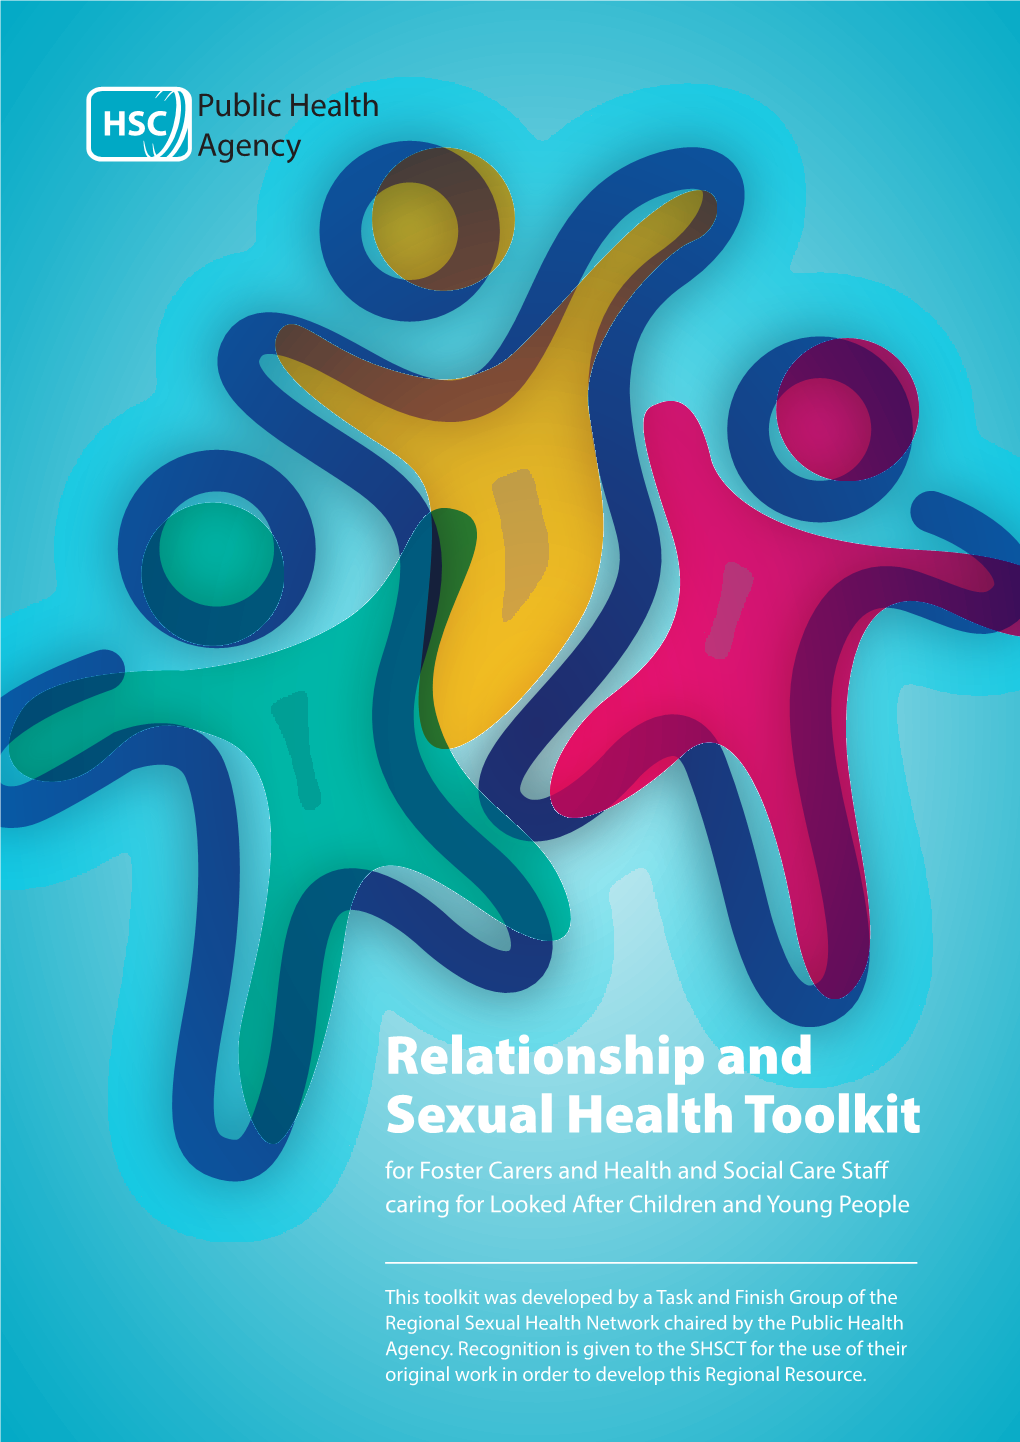 Relationship and Sexual Health Toolkit for Foster Carers and Health and Social Care Staff Caring for Looked After Children and Young People